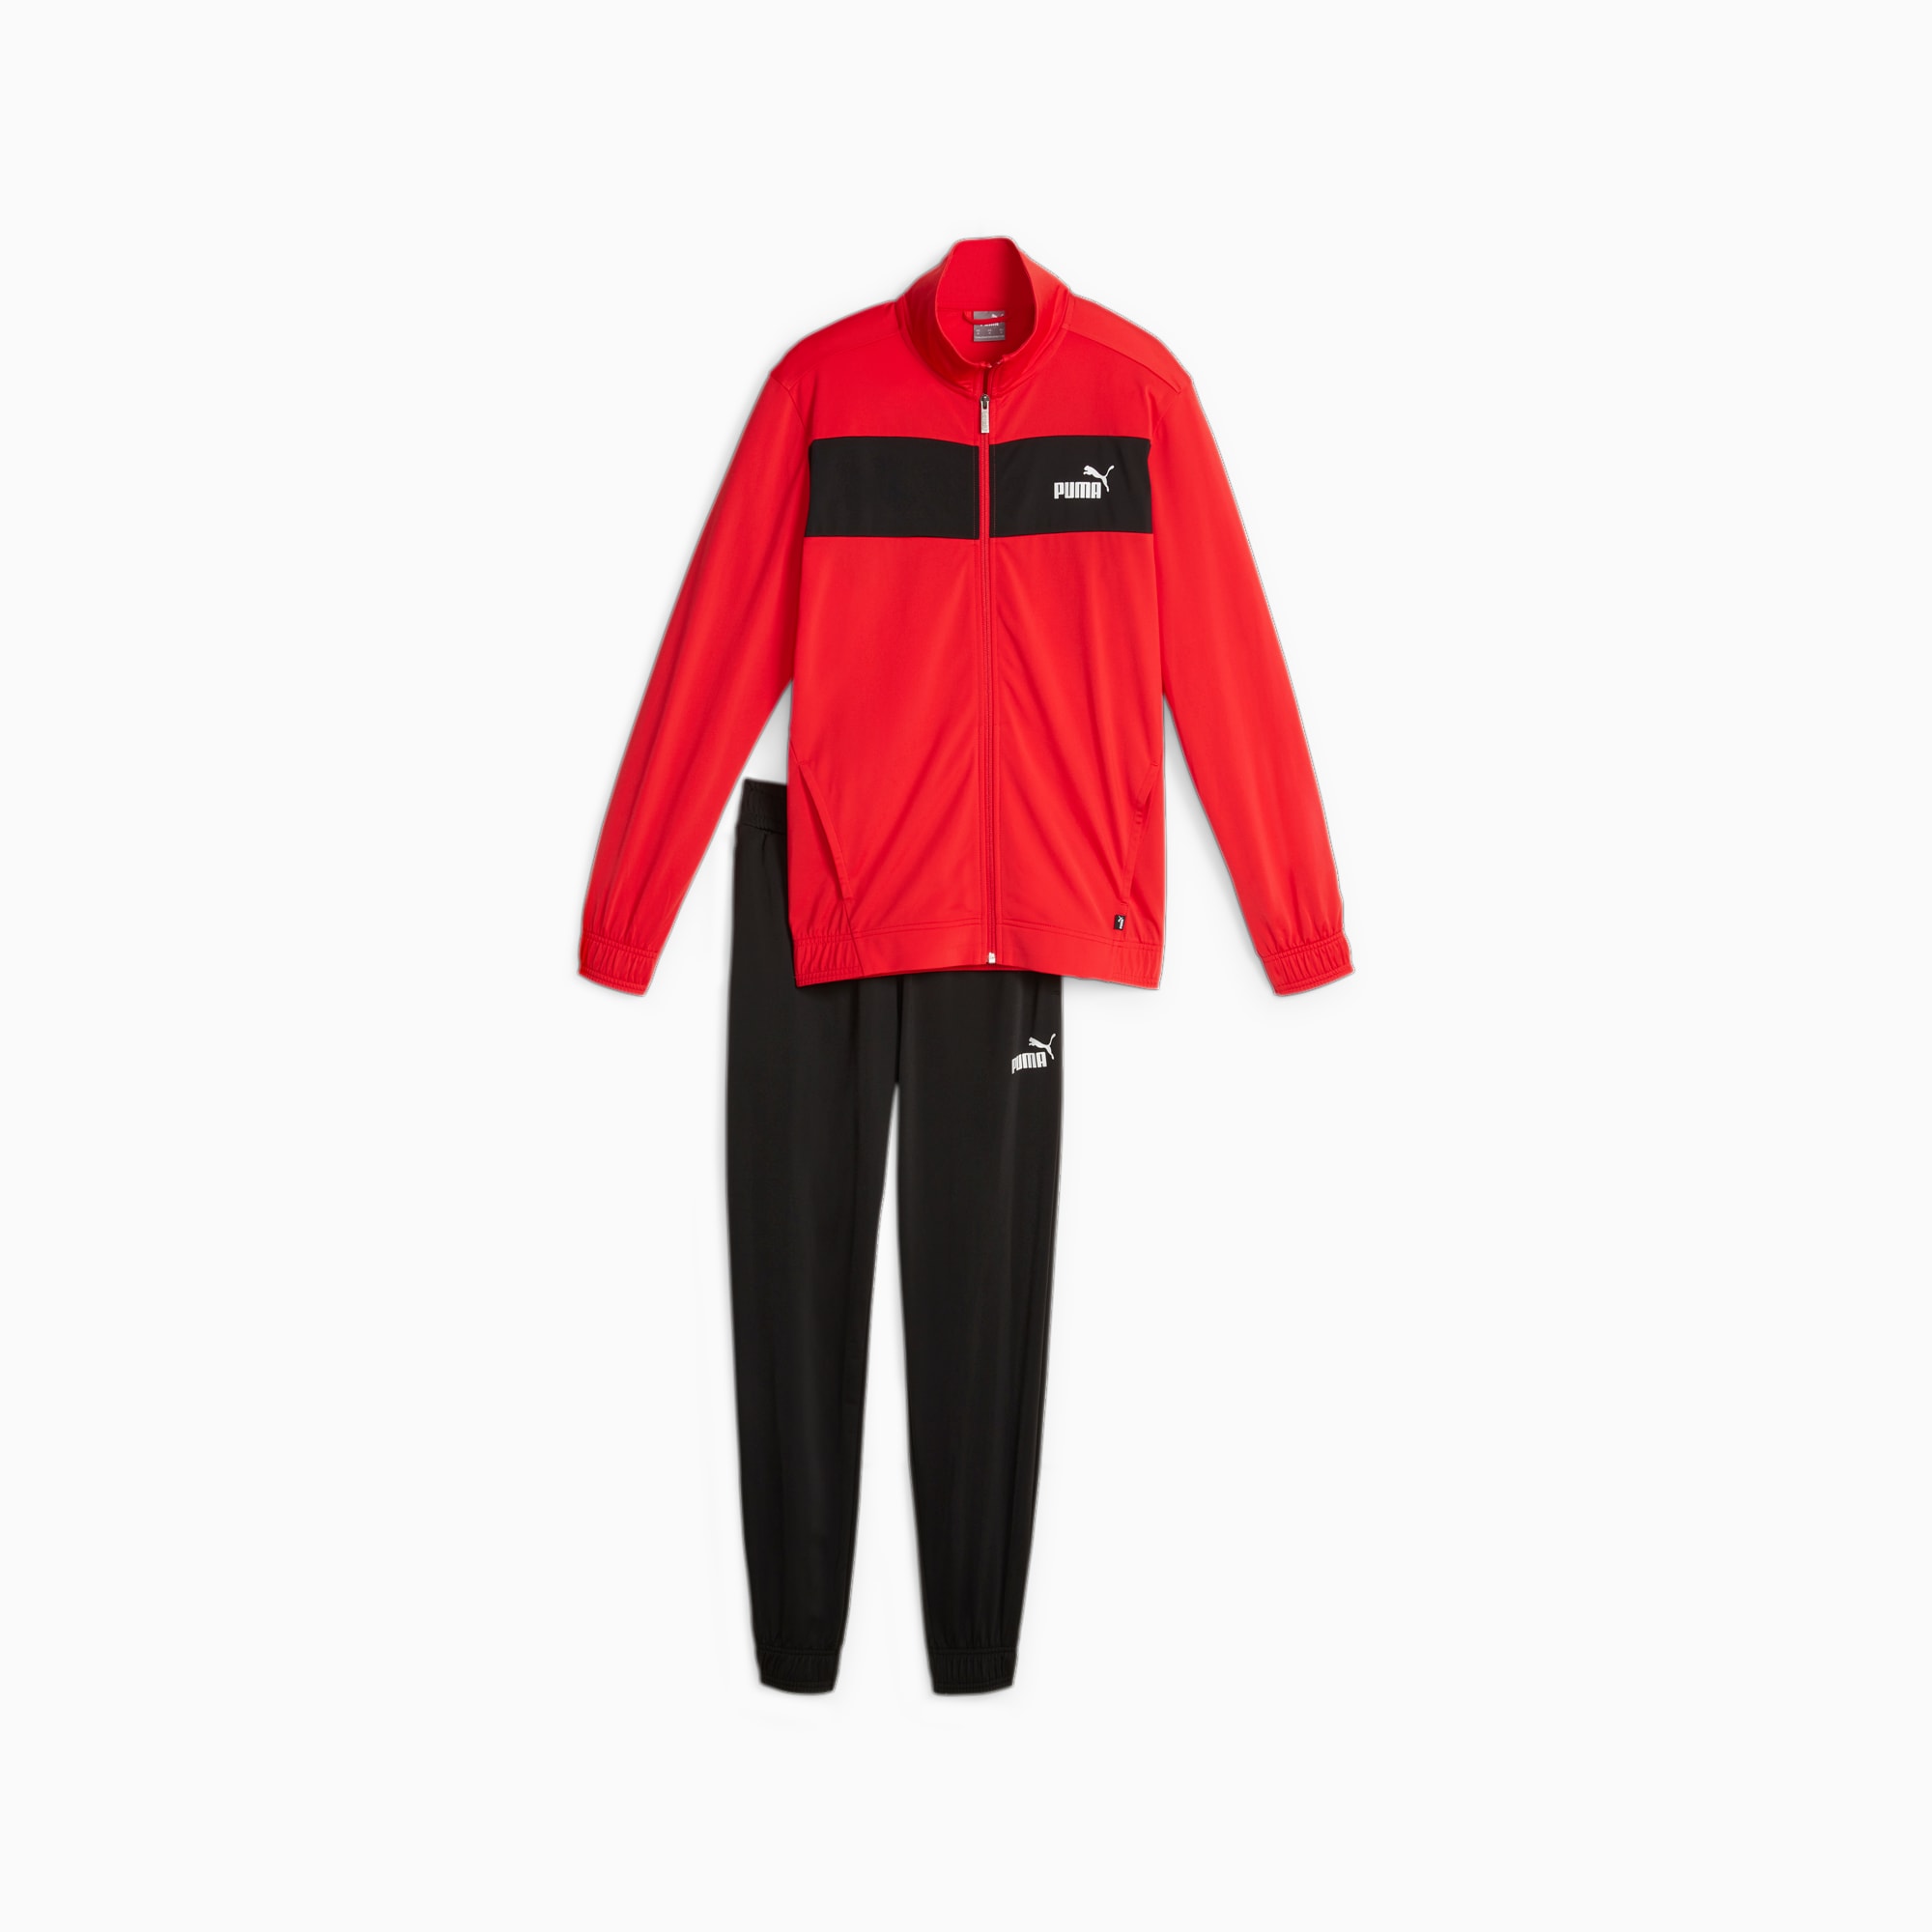 PUMA Men's Poly Tracksuit, For All Time Red, Size 4XL, Clothing